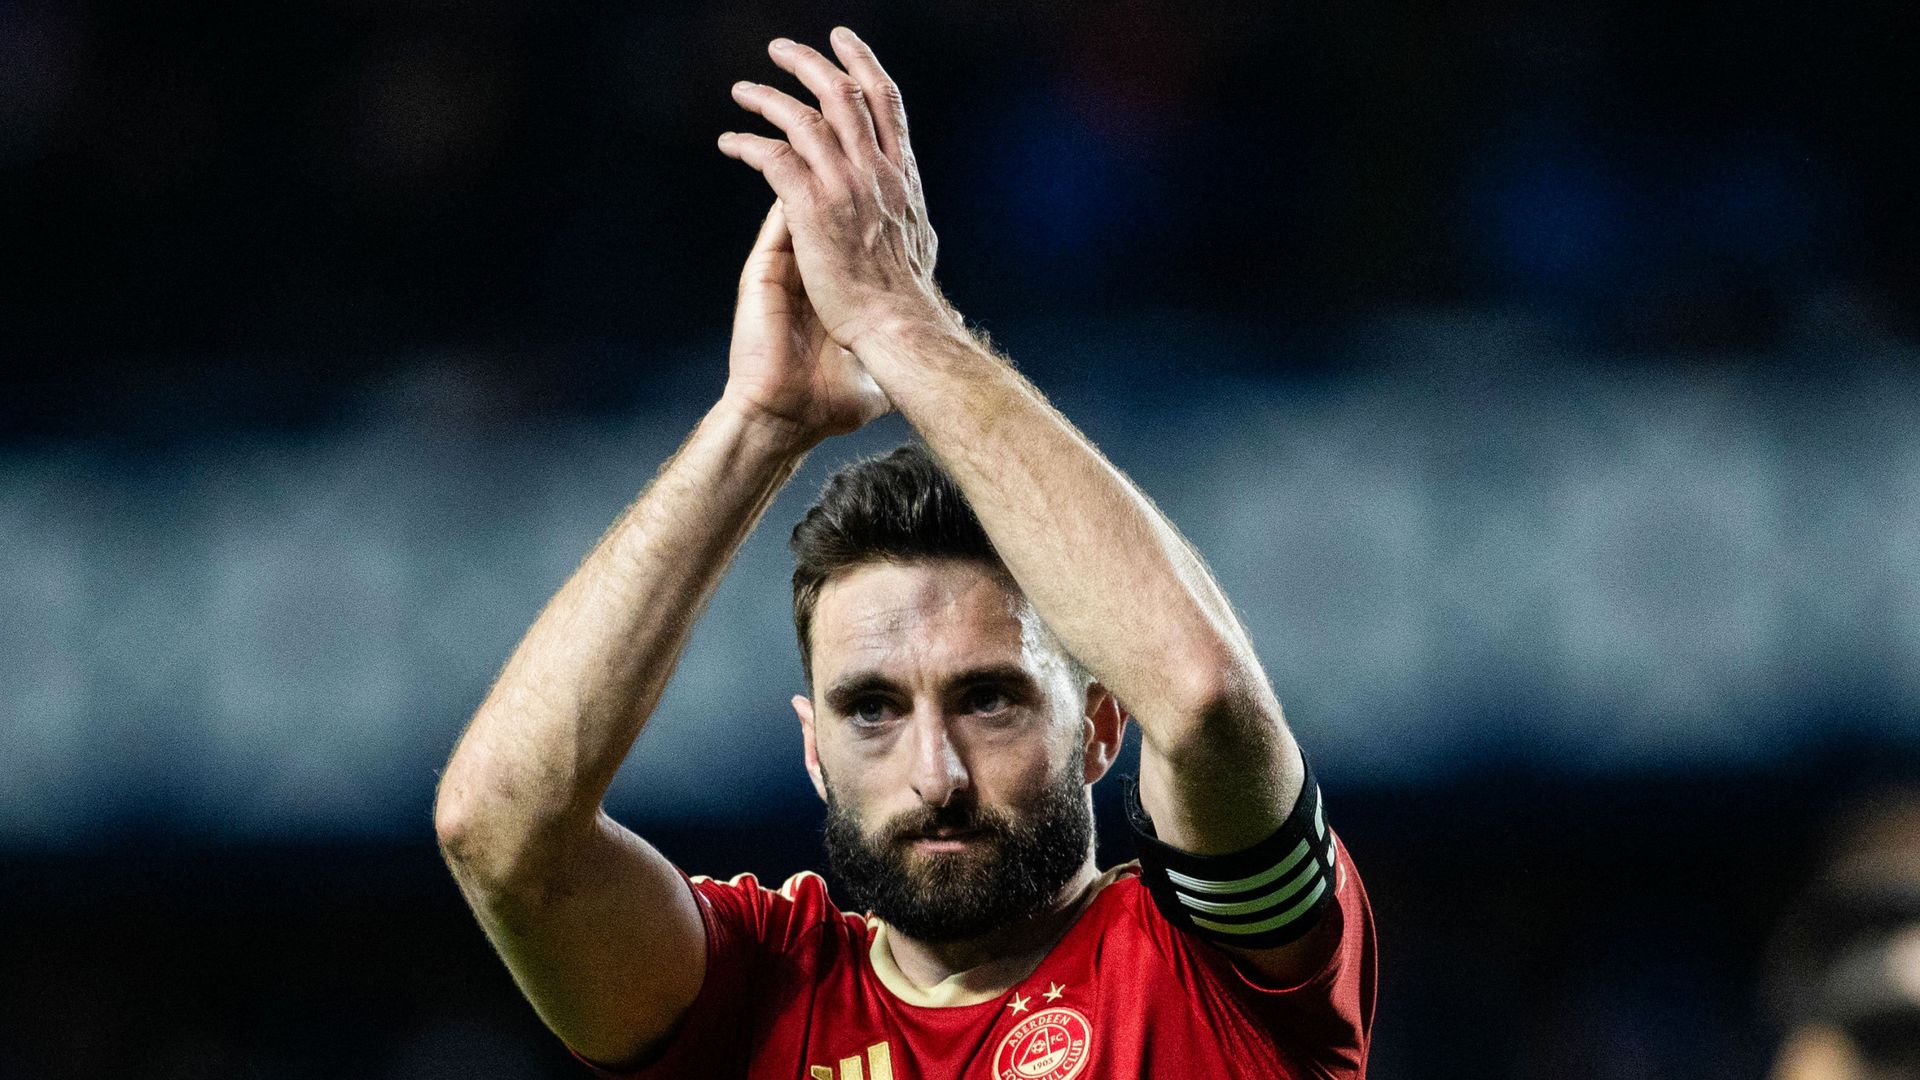 Shinnie on living with Crohn's: 'I thought my career was gone'